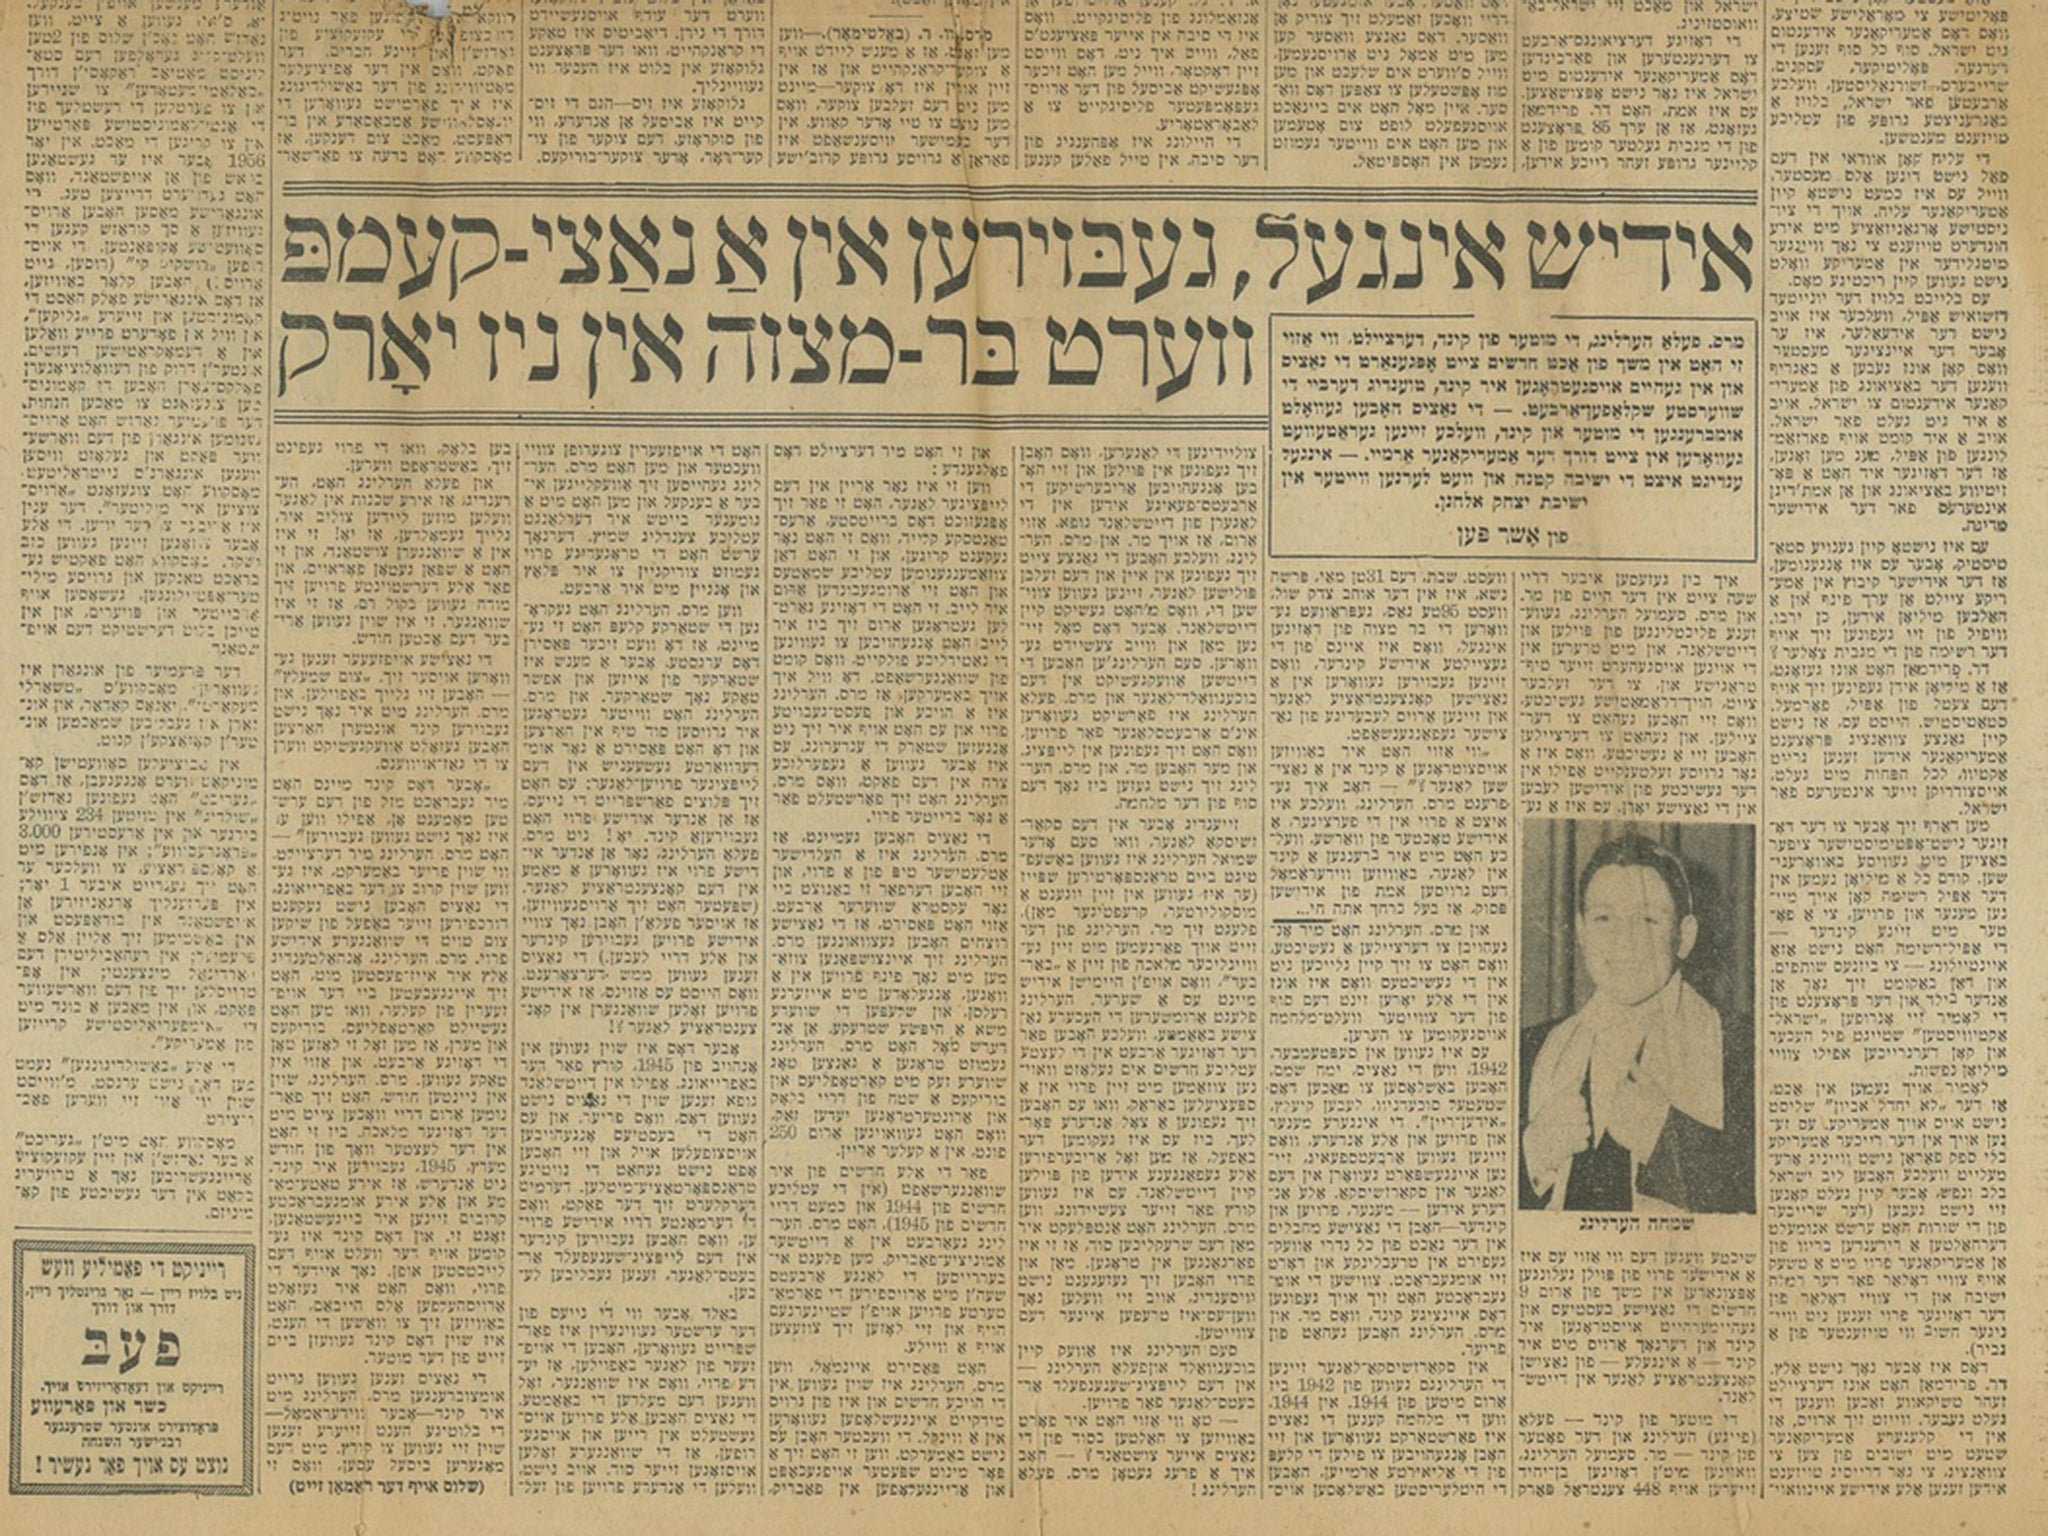 'Jewish Boy, Born in a Nazi Camp, Becomes Bar Mitzvah in New York' Der Tog-Morgen Zshurnal/The Day-Jewish Journal, Wed June 18, 1958